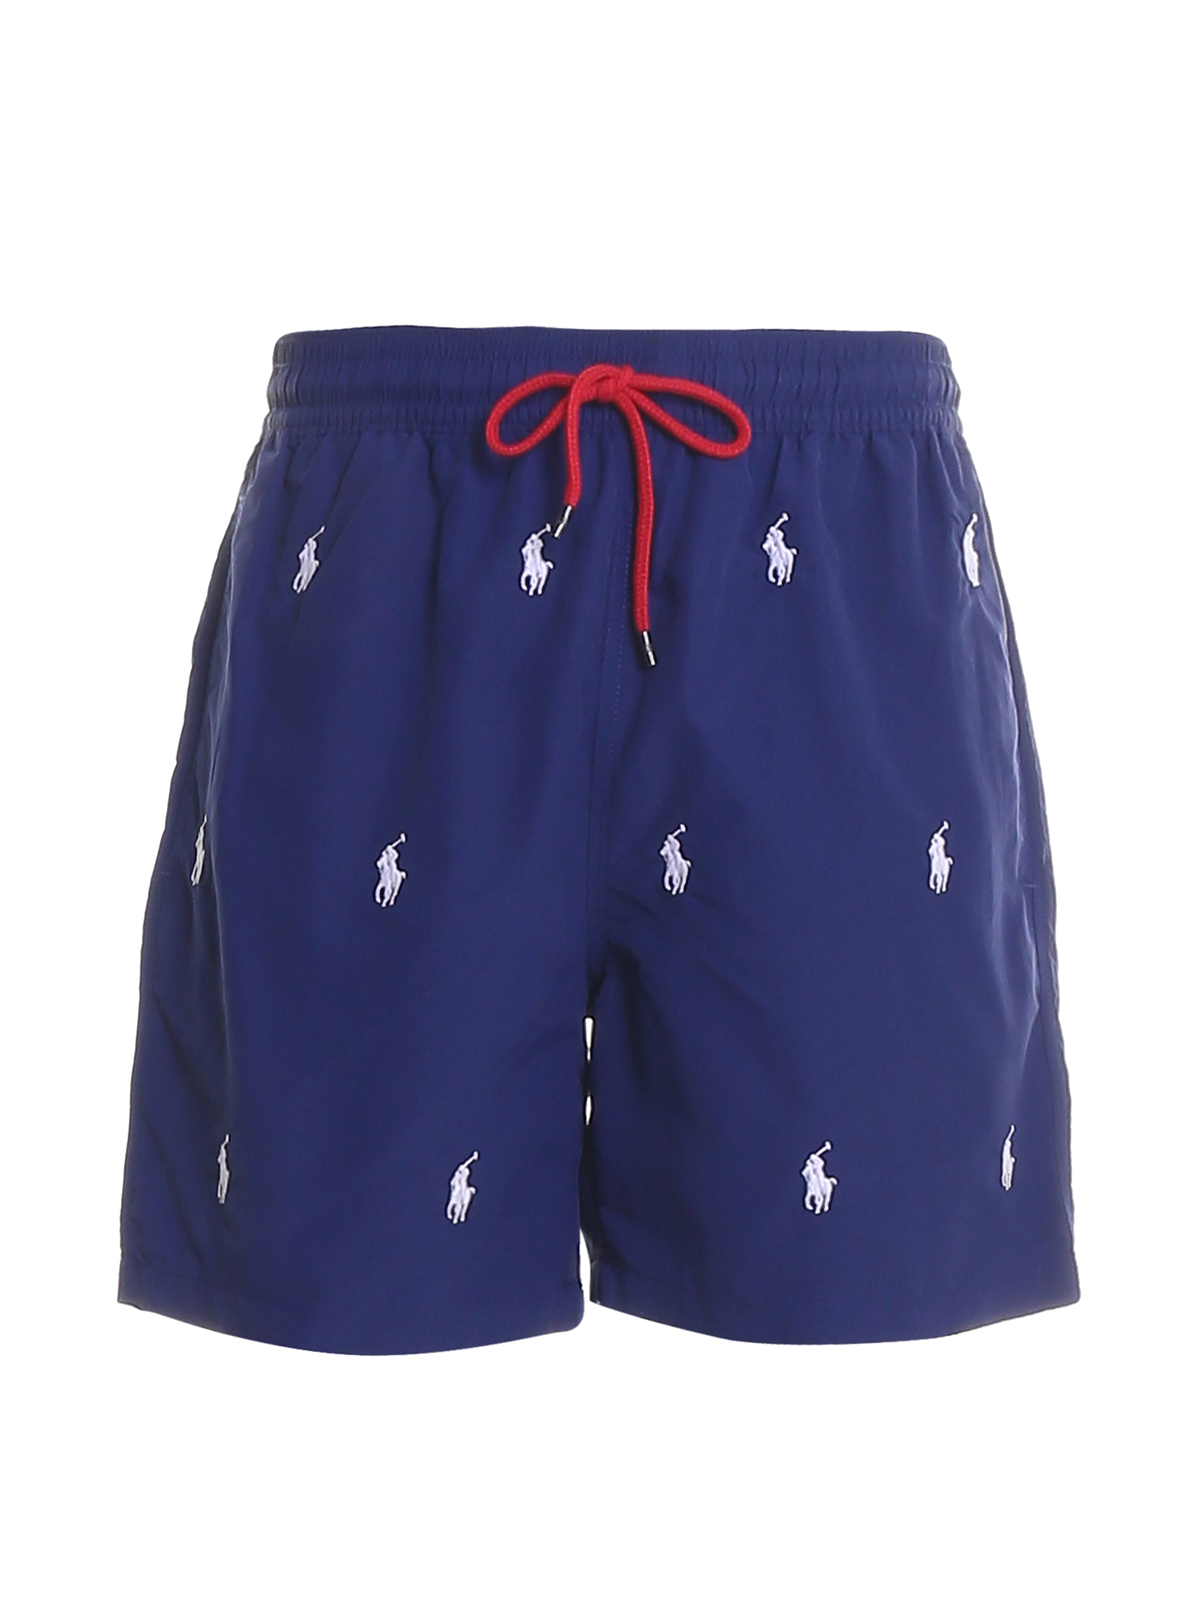 POLO RALPH LAUREN ALL OVER LOGO EMBROIDERY SWIM SHORTS